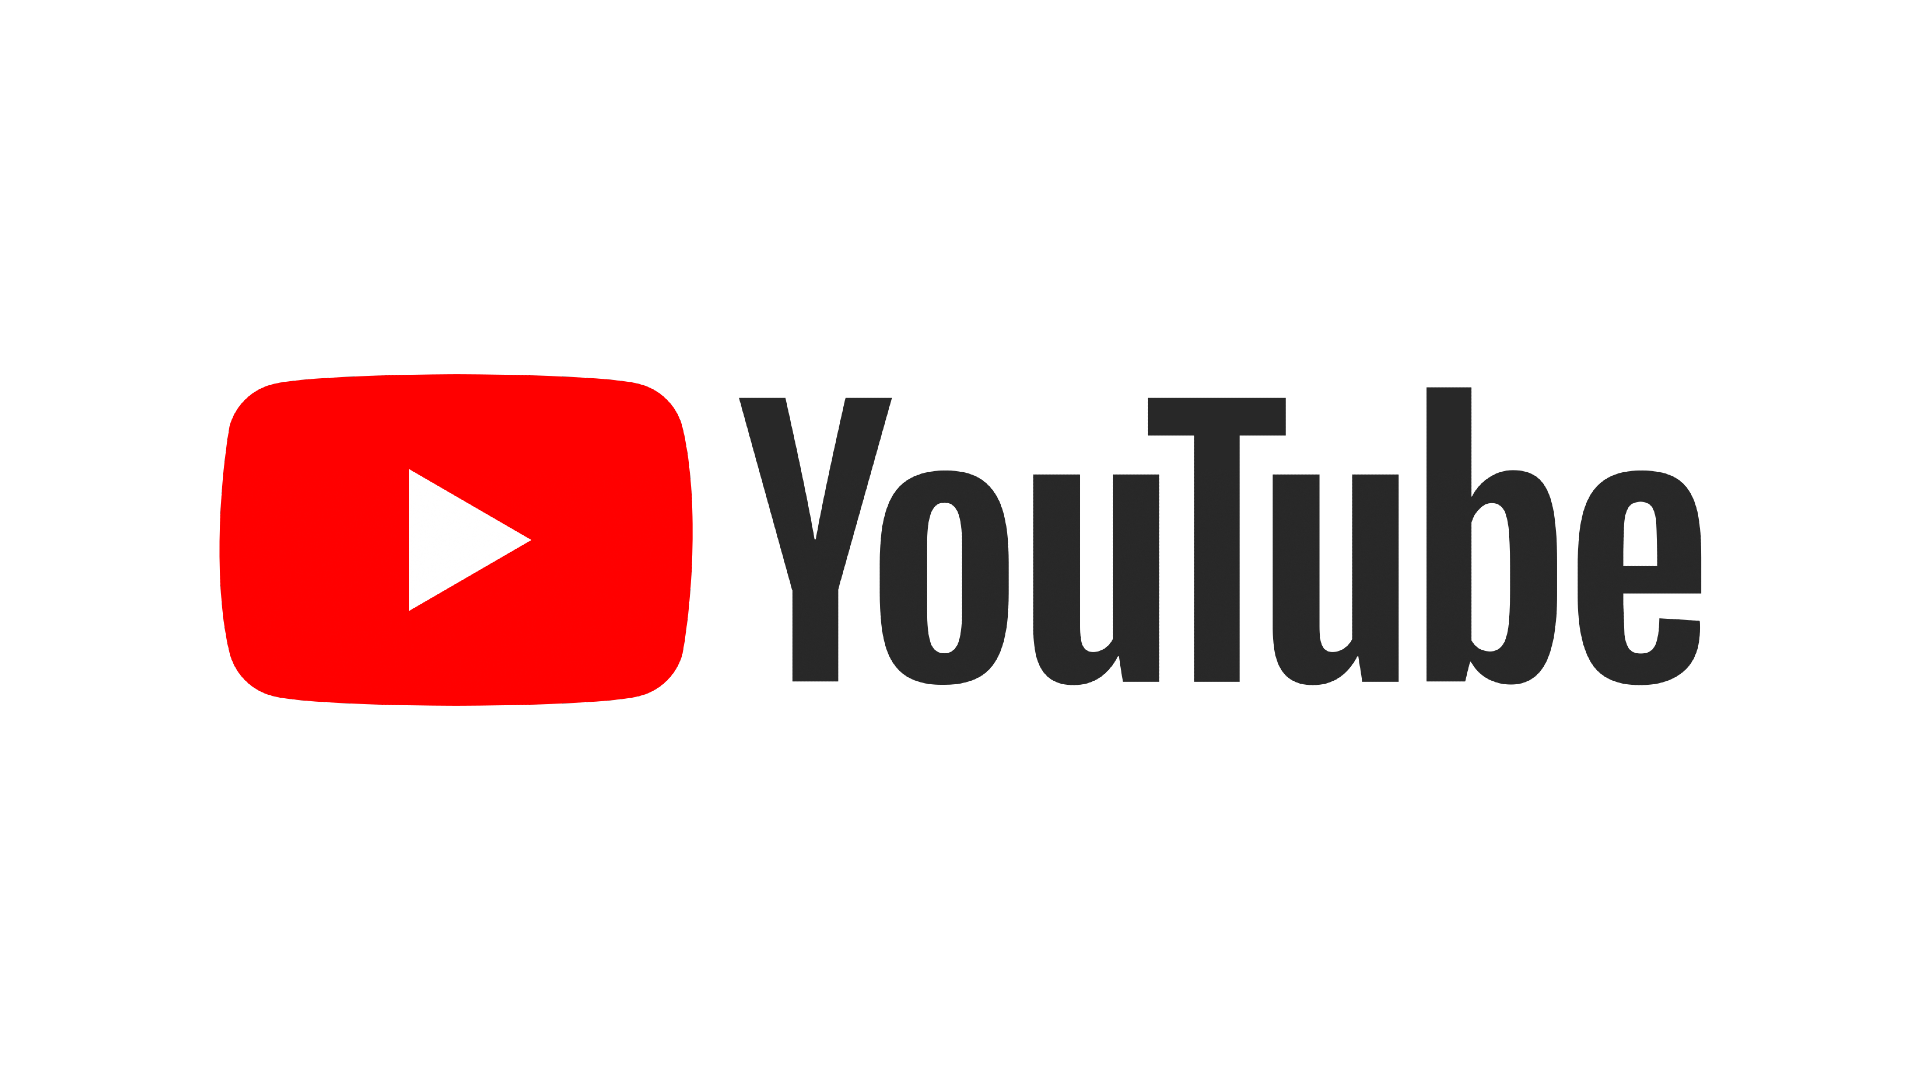 Google now allows combination of bumper ads and skippable in-stream for YouTube reach